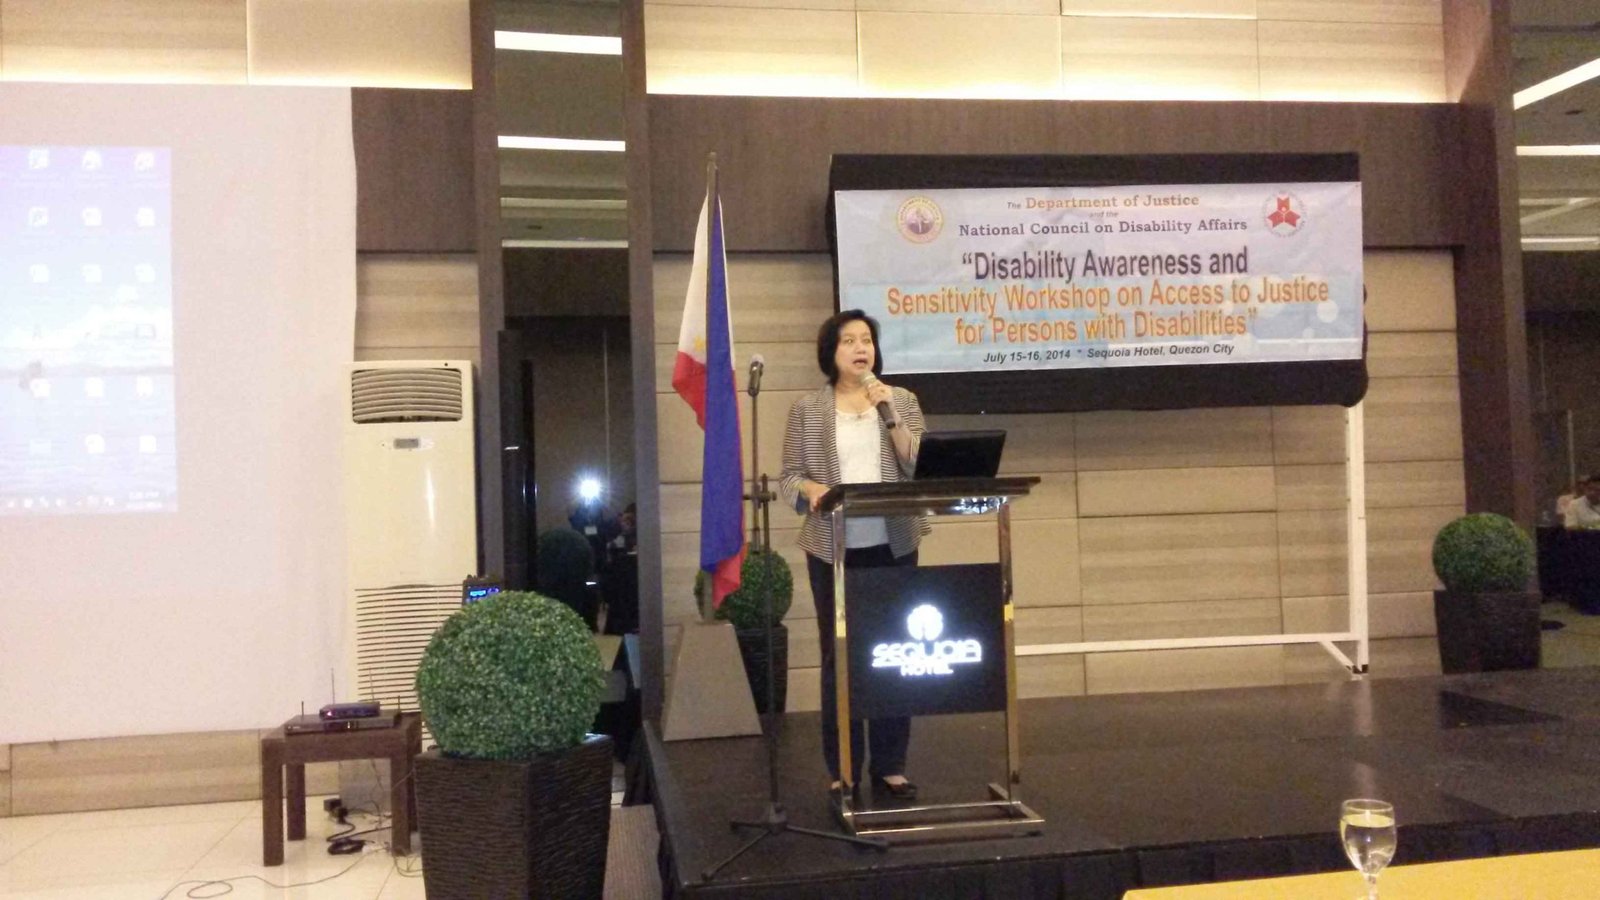 Atty. Tanodra-Armamento delivering her opening remarks